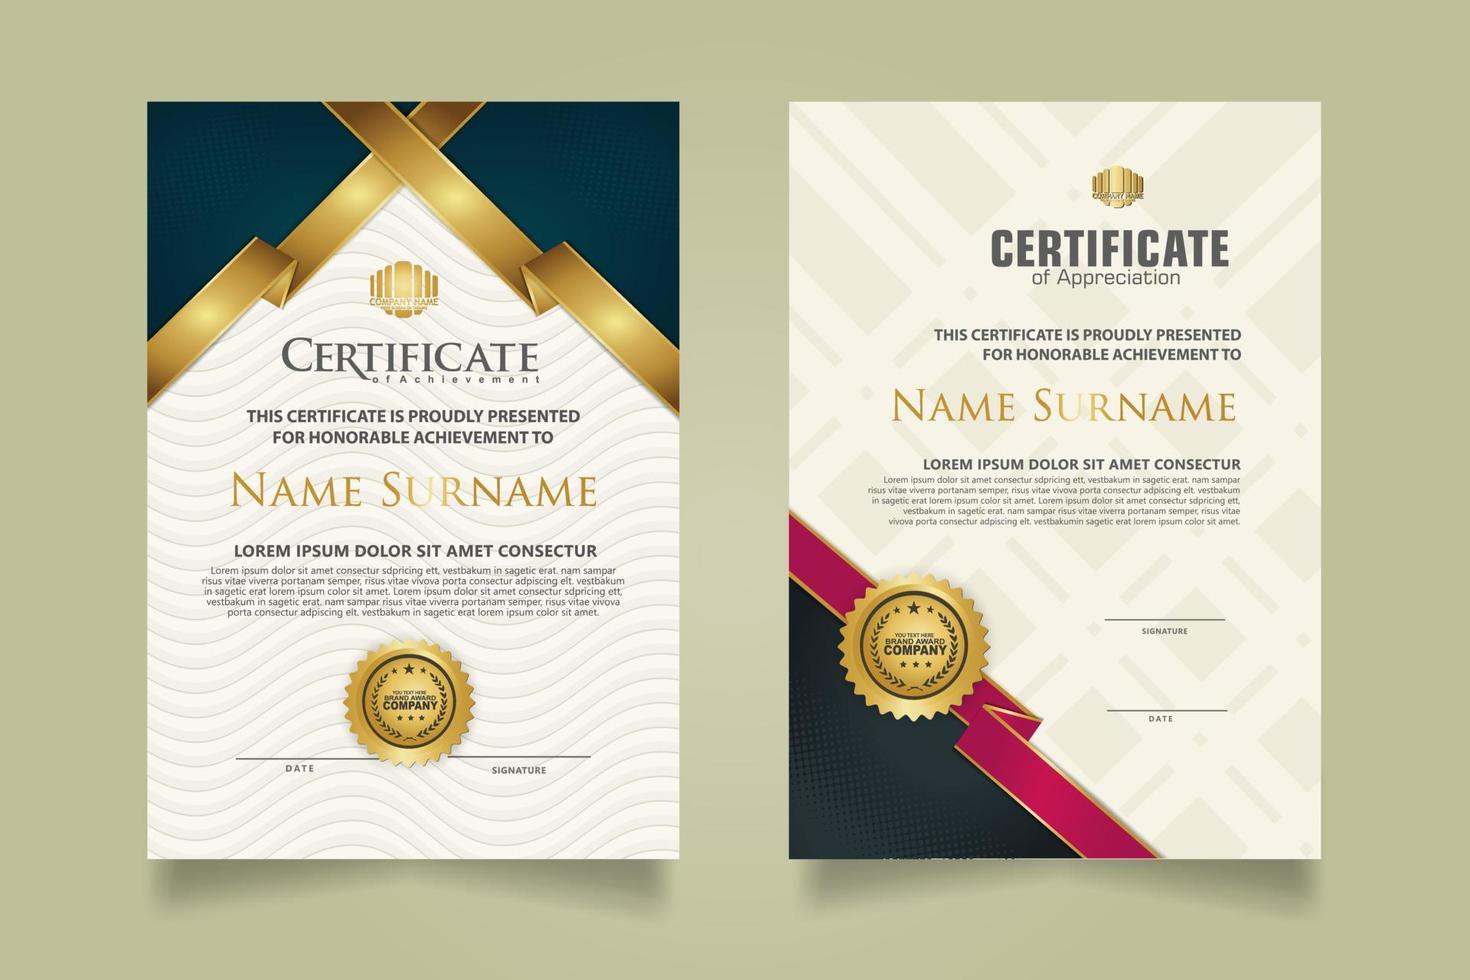 set certificate template with ribbon stripes ornament and modern texture pattern background. Diploma. Vector illustration